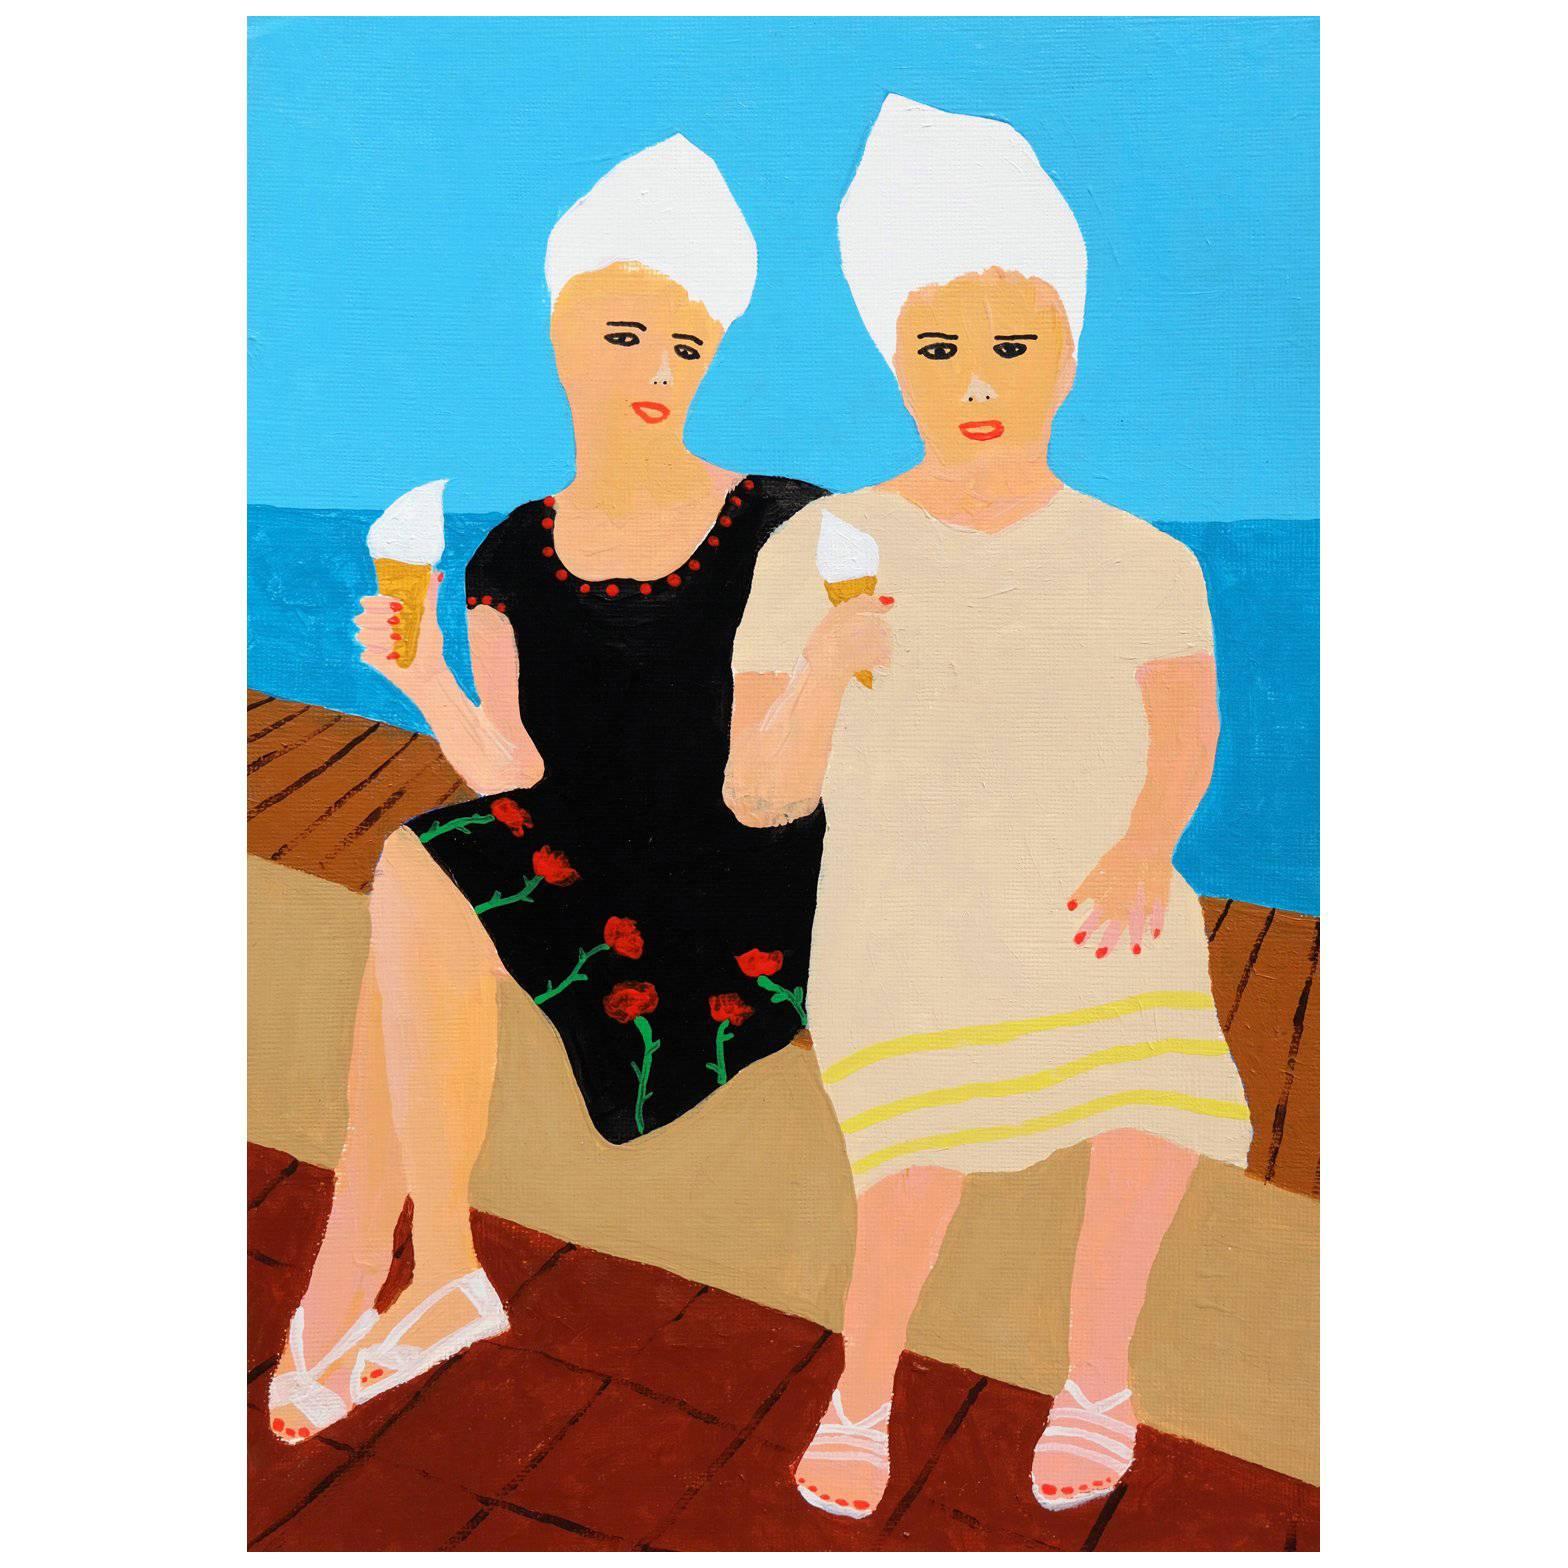 'Girls on Top' Portrait Painting by Alan Fears Acrylic on Paper Seaside